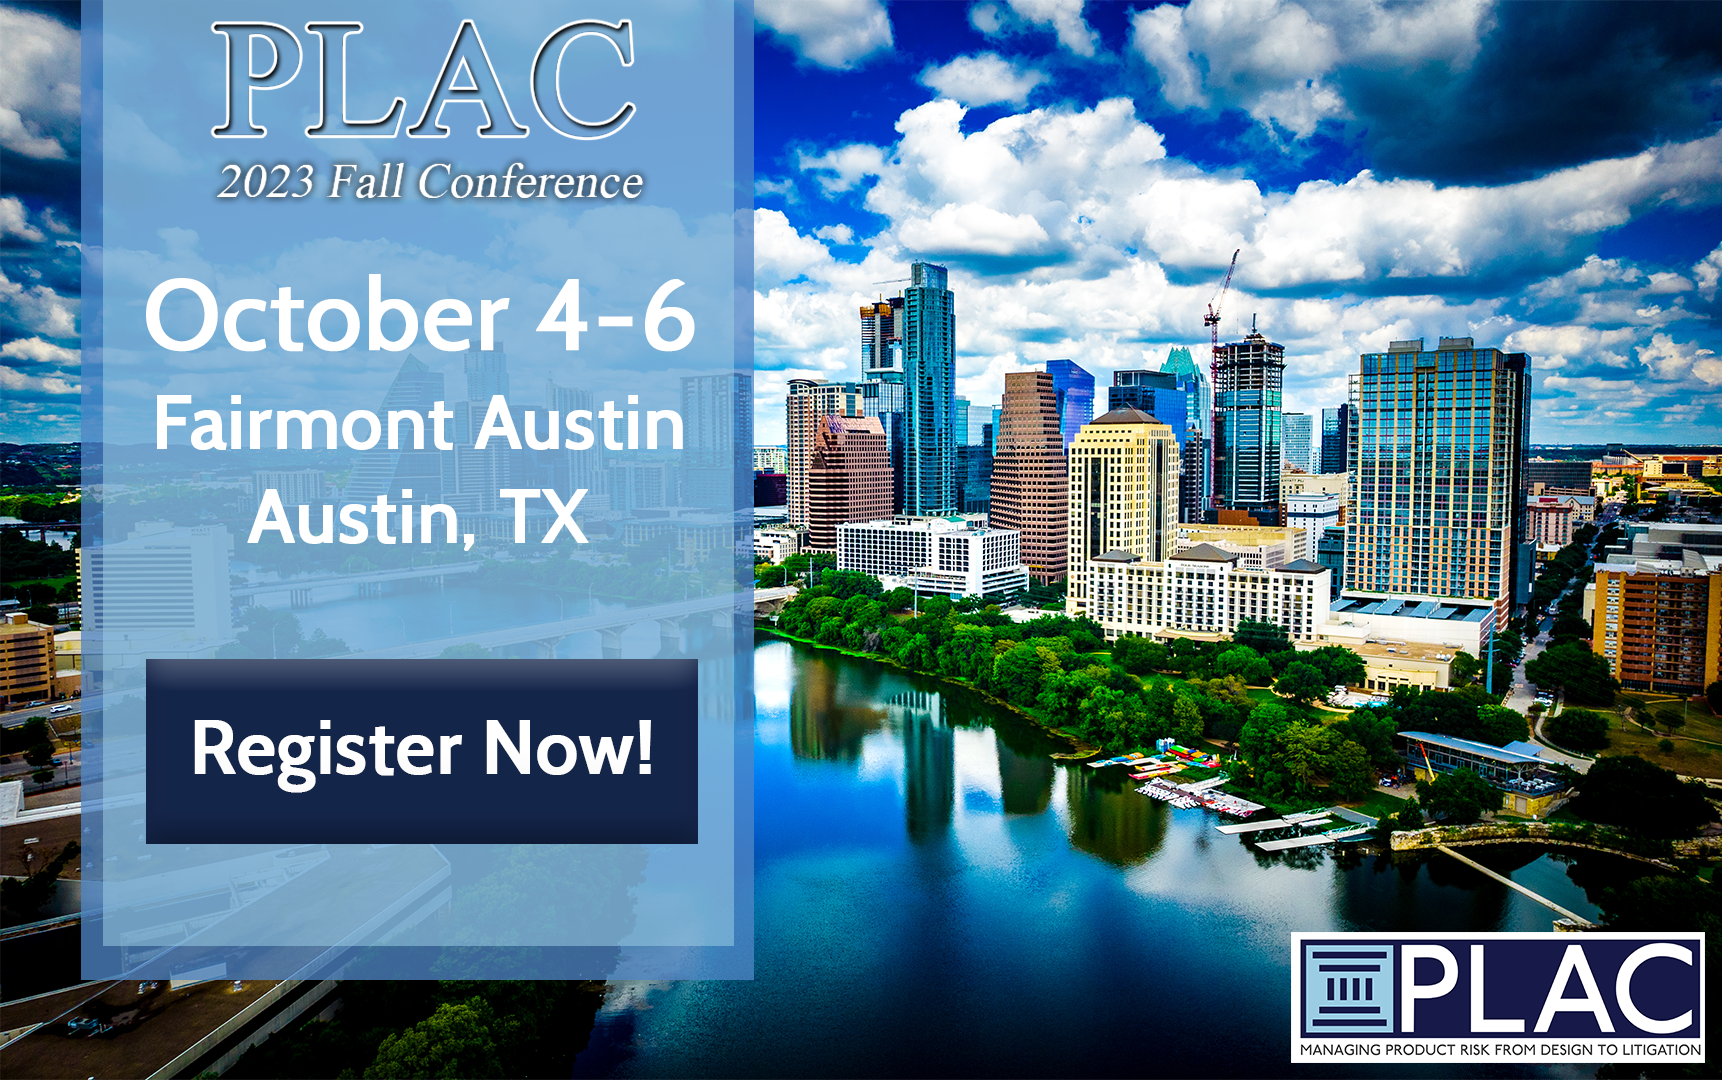 Register for the Fall 2023 Conference, October 4-6 in Austin, TX